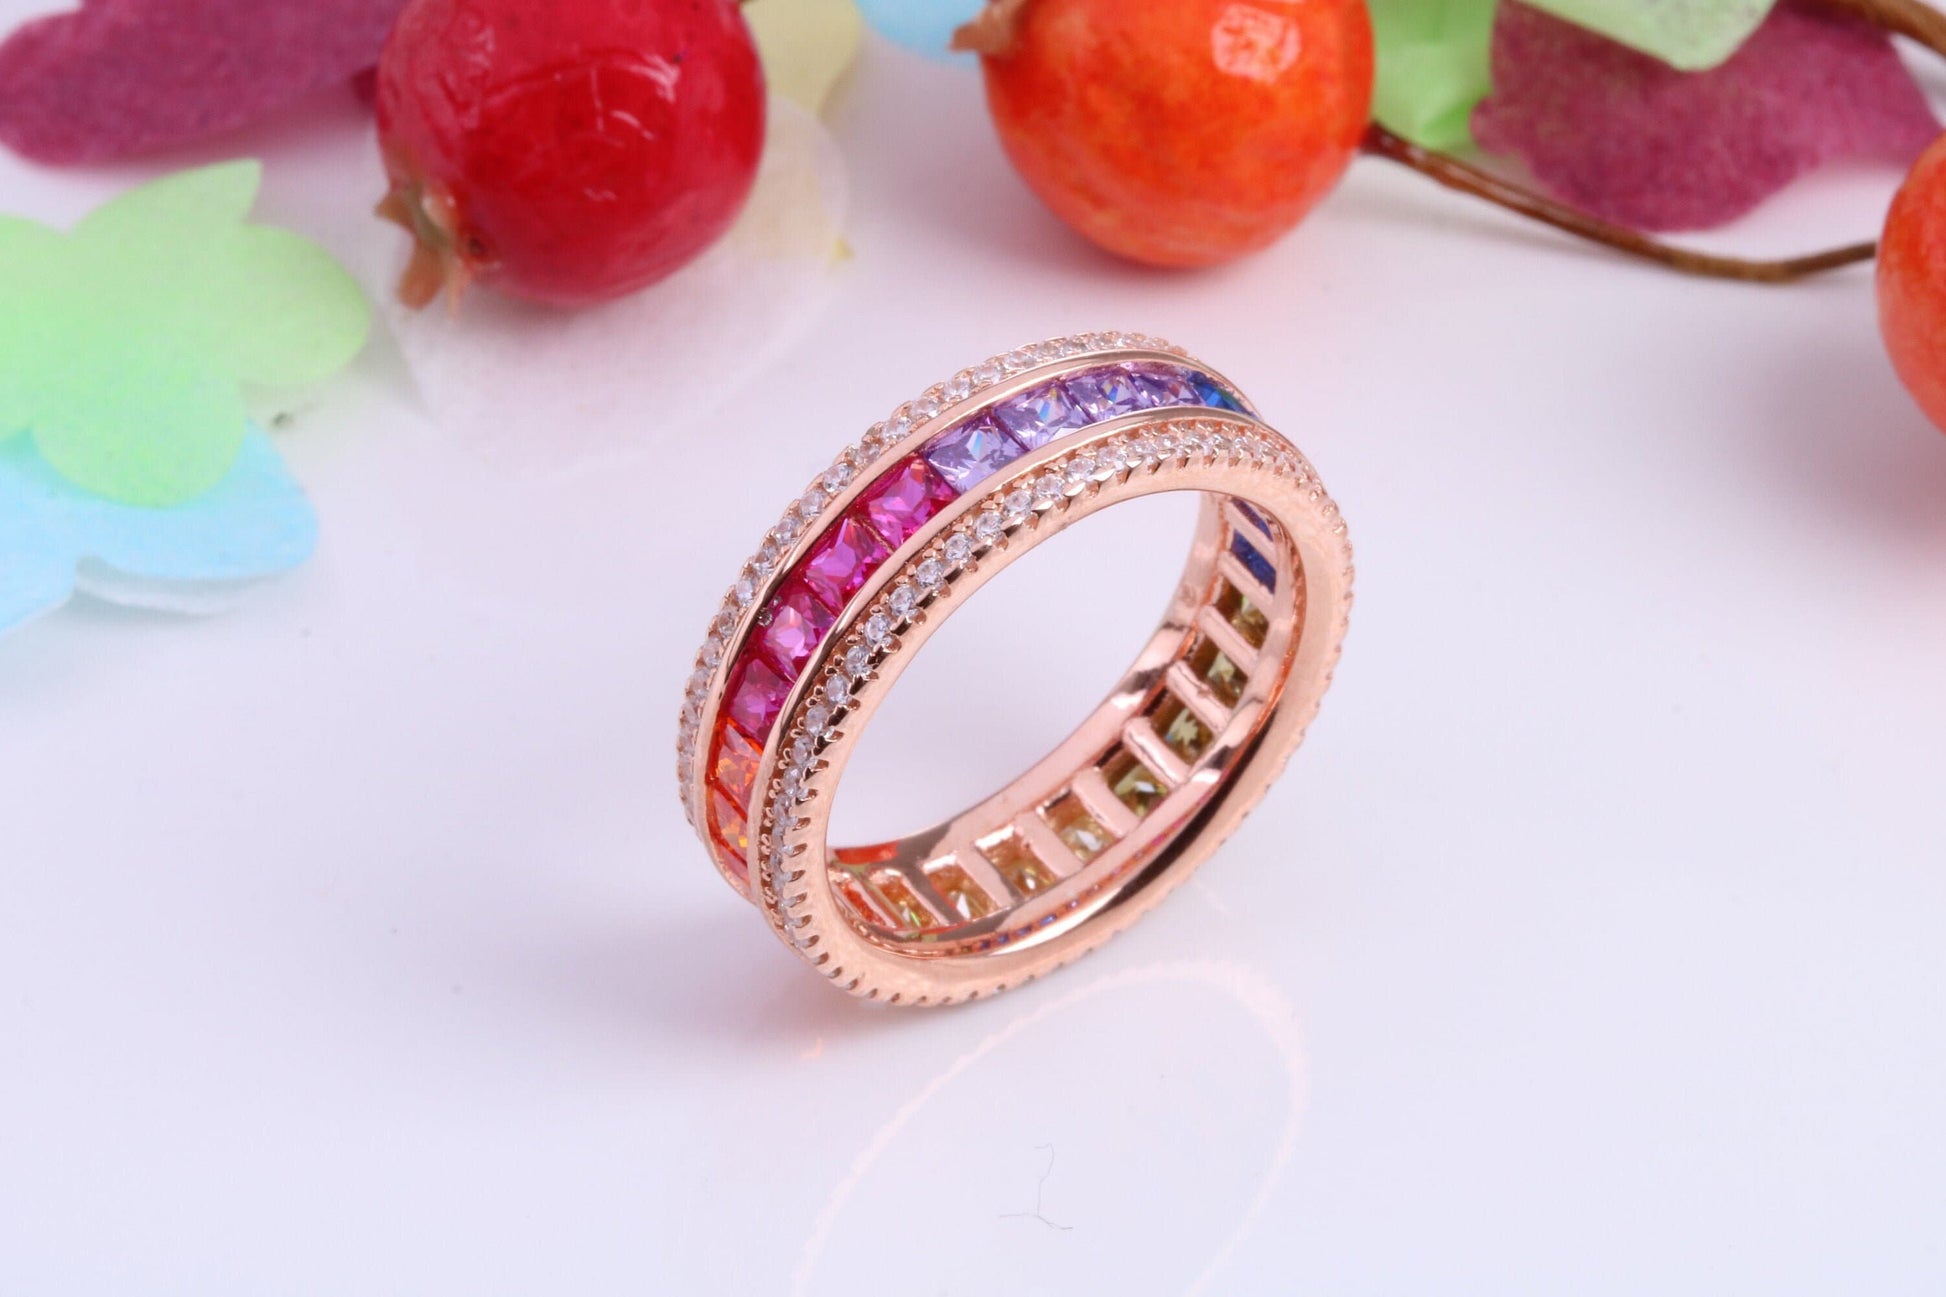 Very Dressy 7 mm wide Rainbow Cubic Zirconia set Ring, Made from solid Silver, 18ct Rose Gold Plated